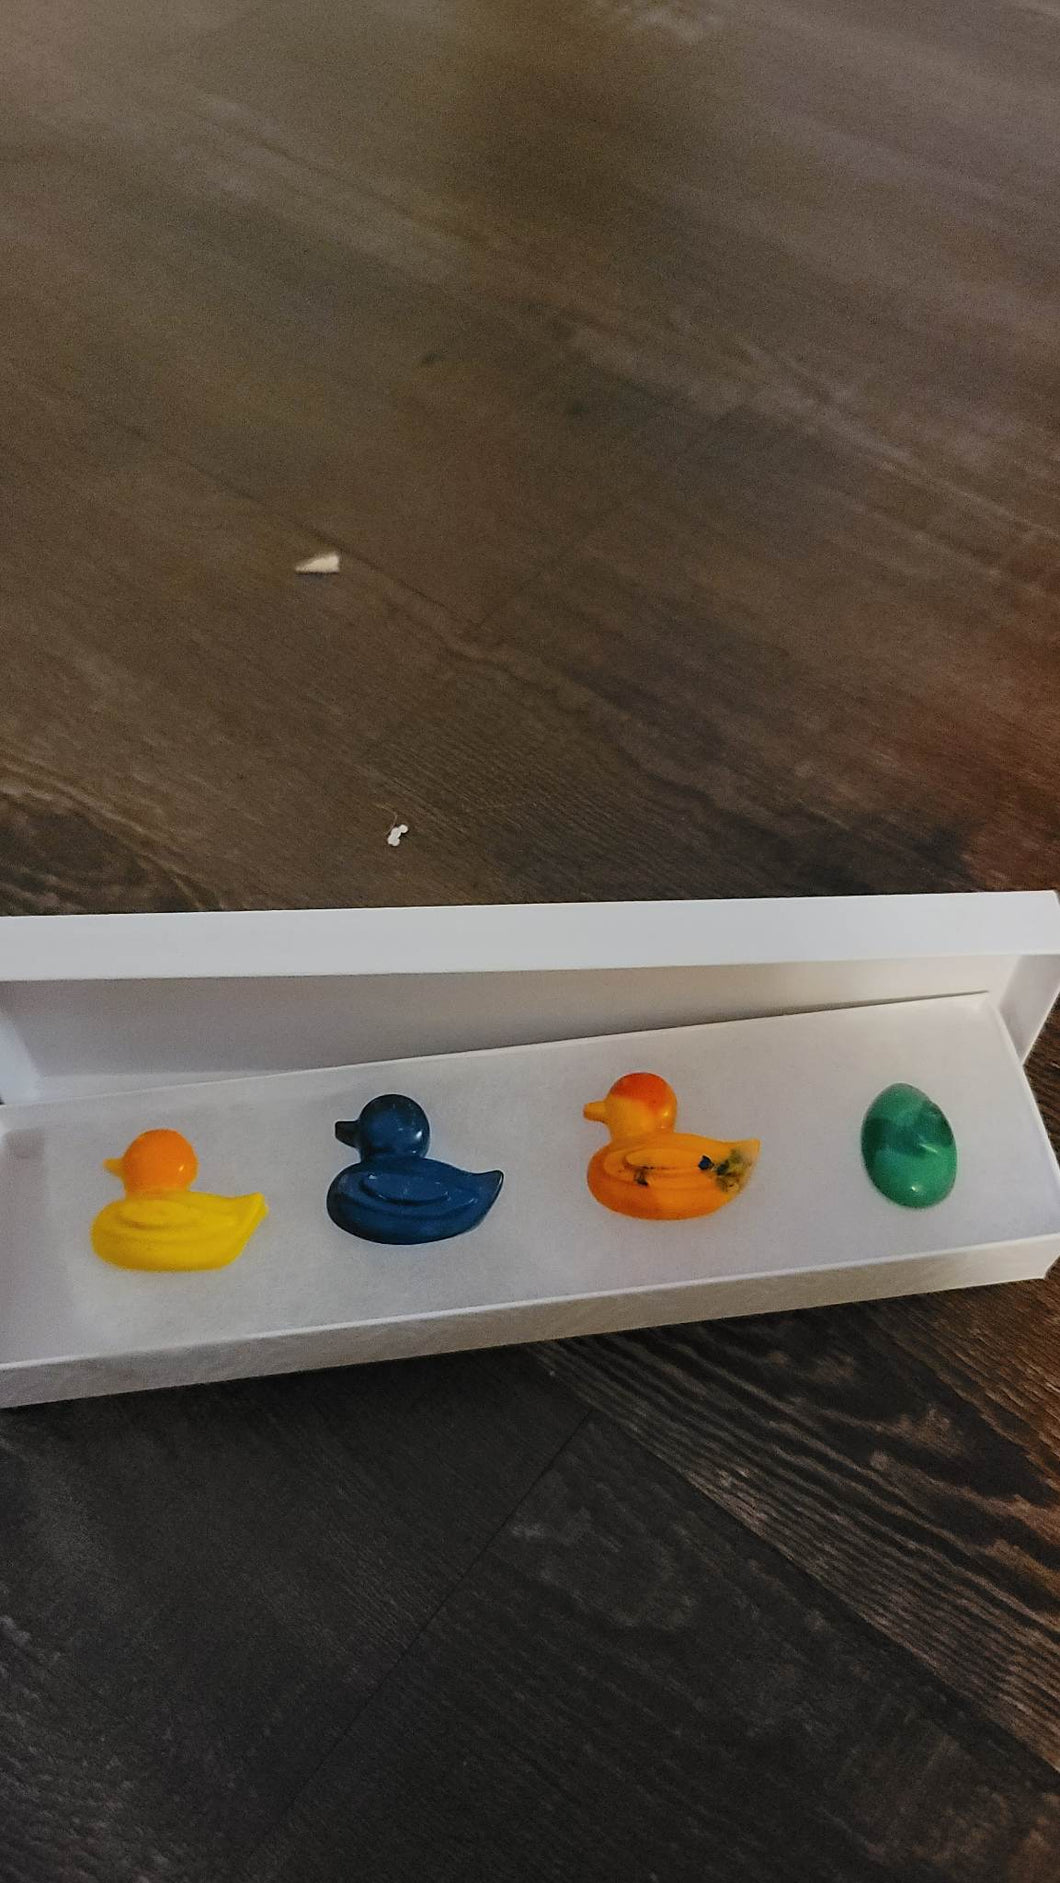 Egg and duck crayon sets